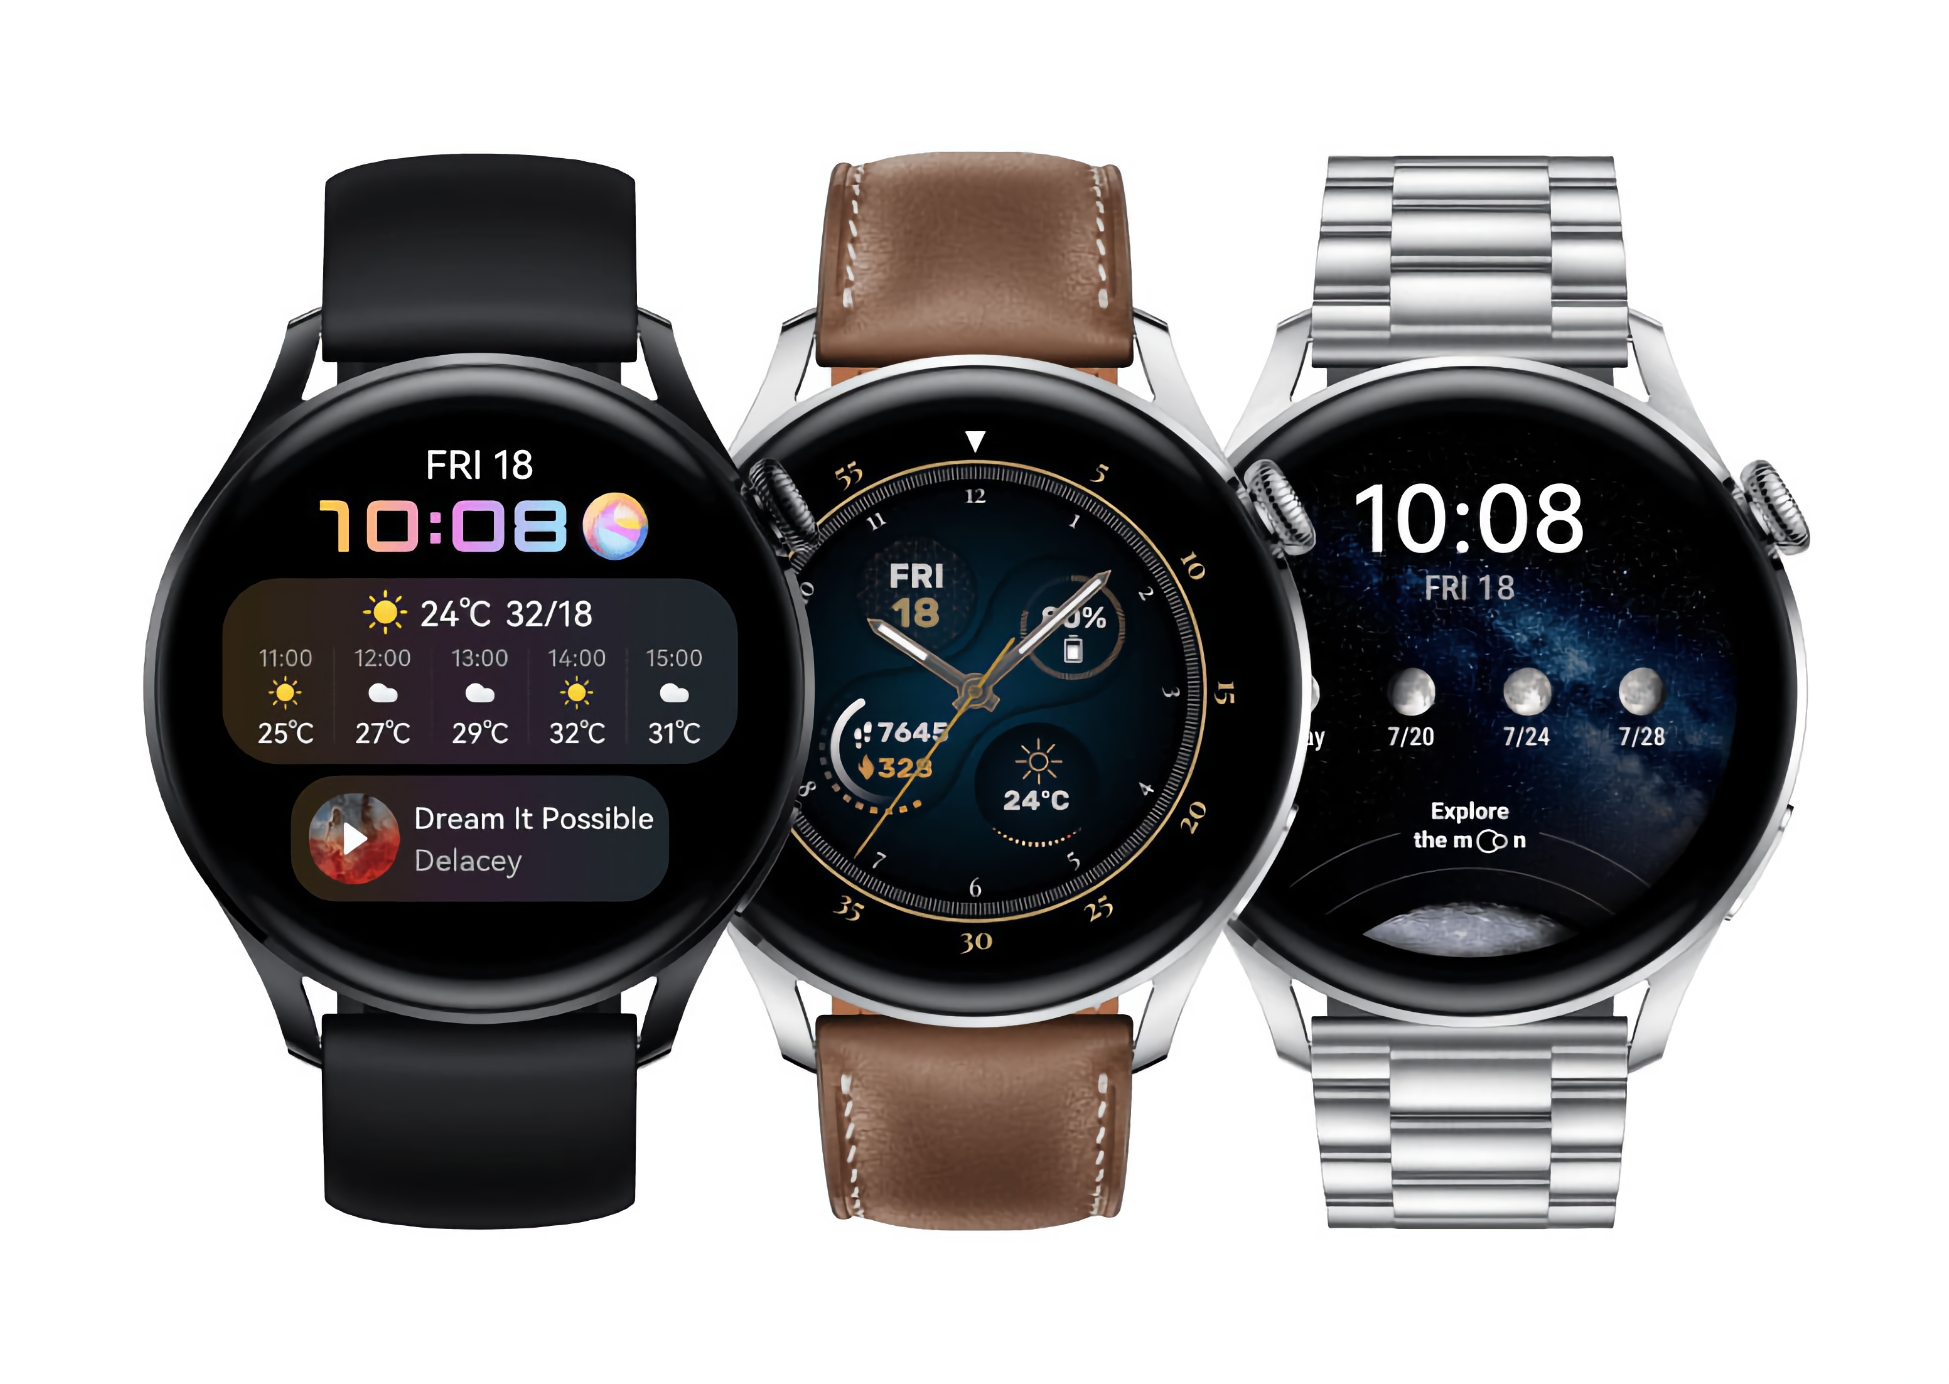 Smart watch Huawei Watch 3 Pro with HarmonyOS 2.0.0.197 update received new features